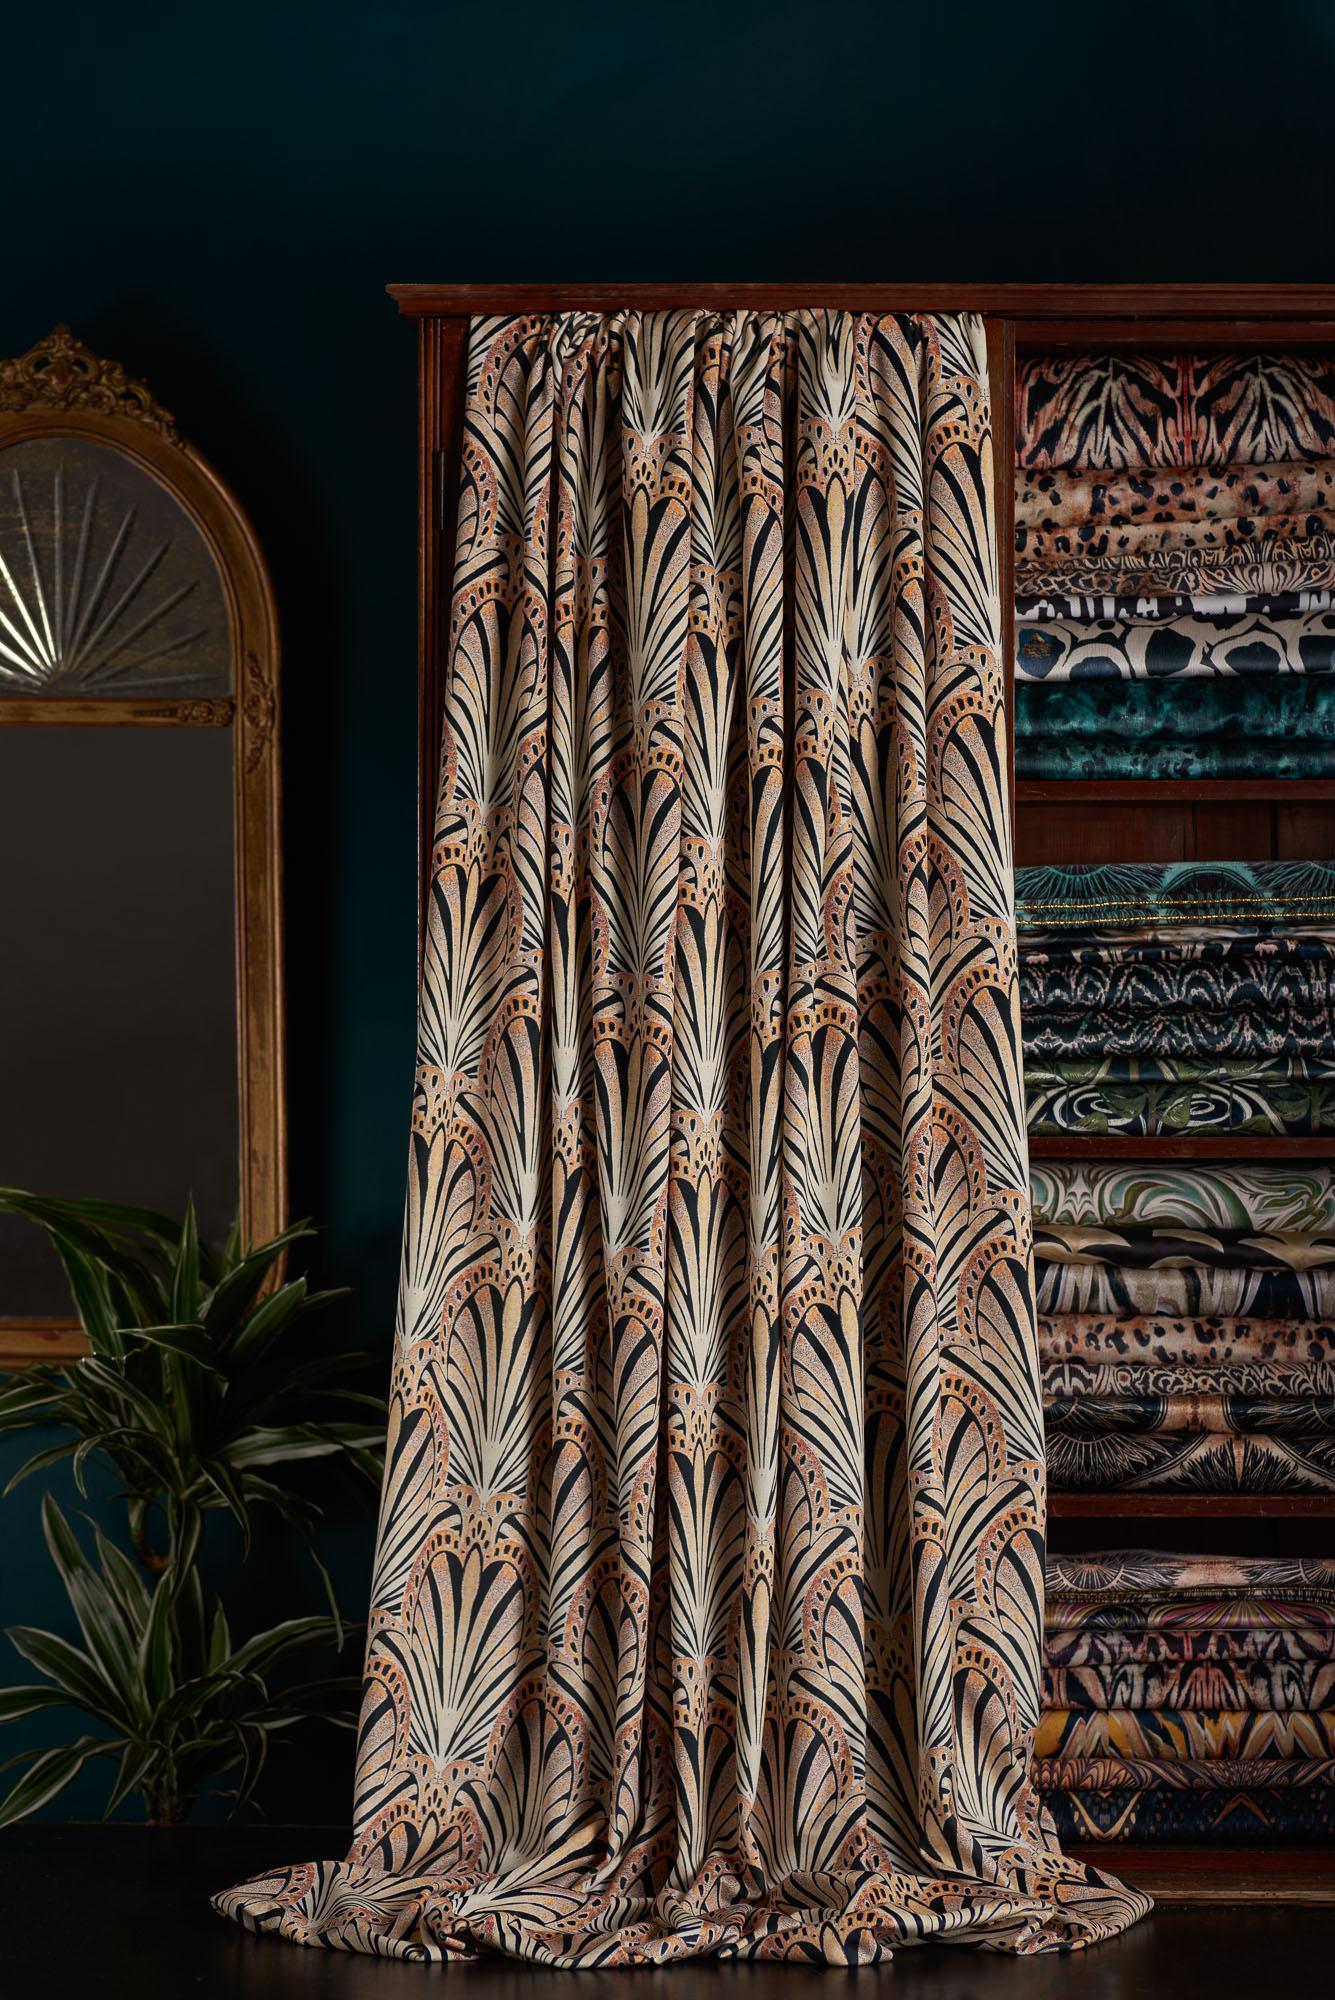 Jada is a 1920s inspired print. This fan-like lino printed design in gold black and peach tones evokes a timeless ambience.

This velvet has a very different handle from our standard velvet. It is extremely floppy and very soft, which makes it ideal